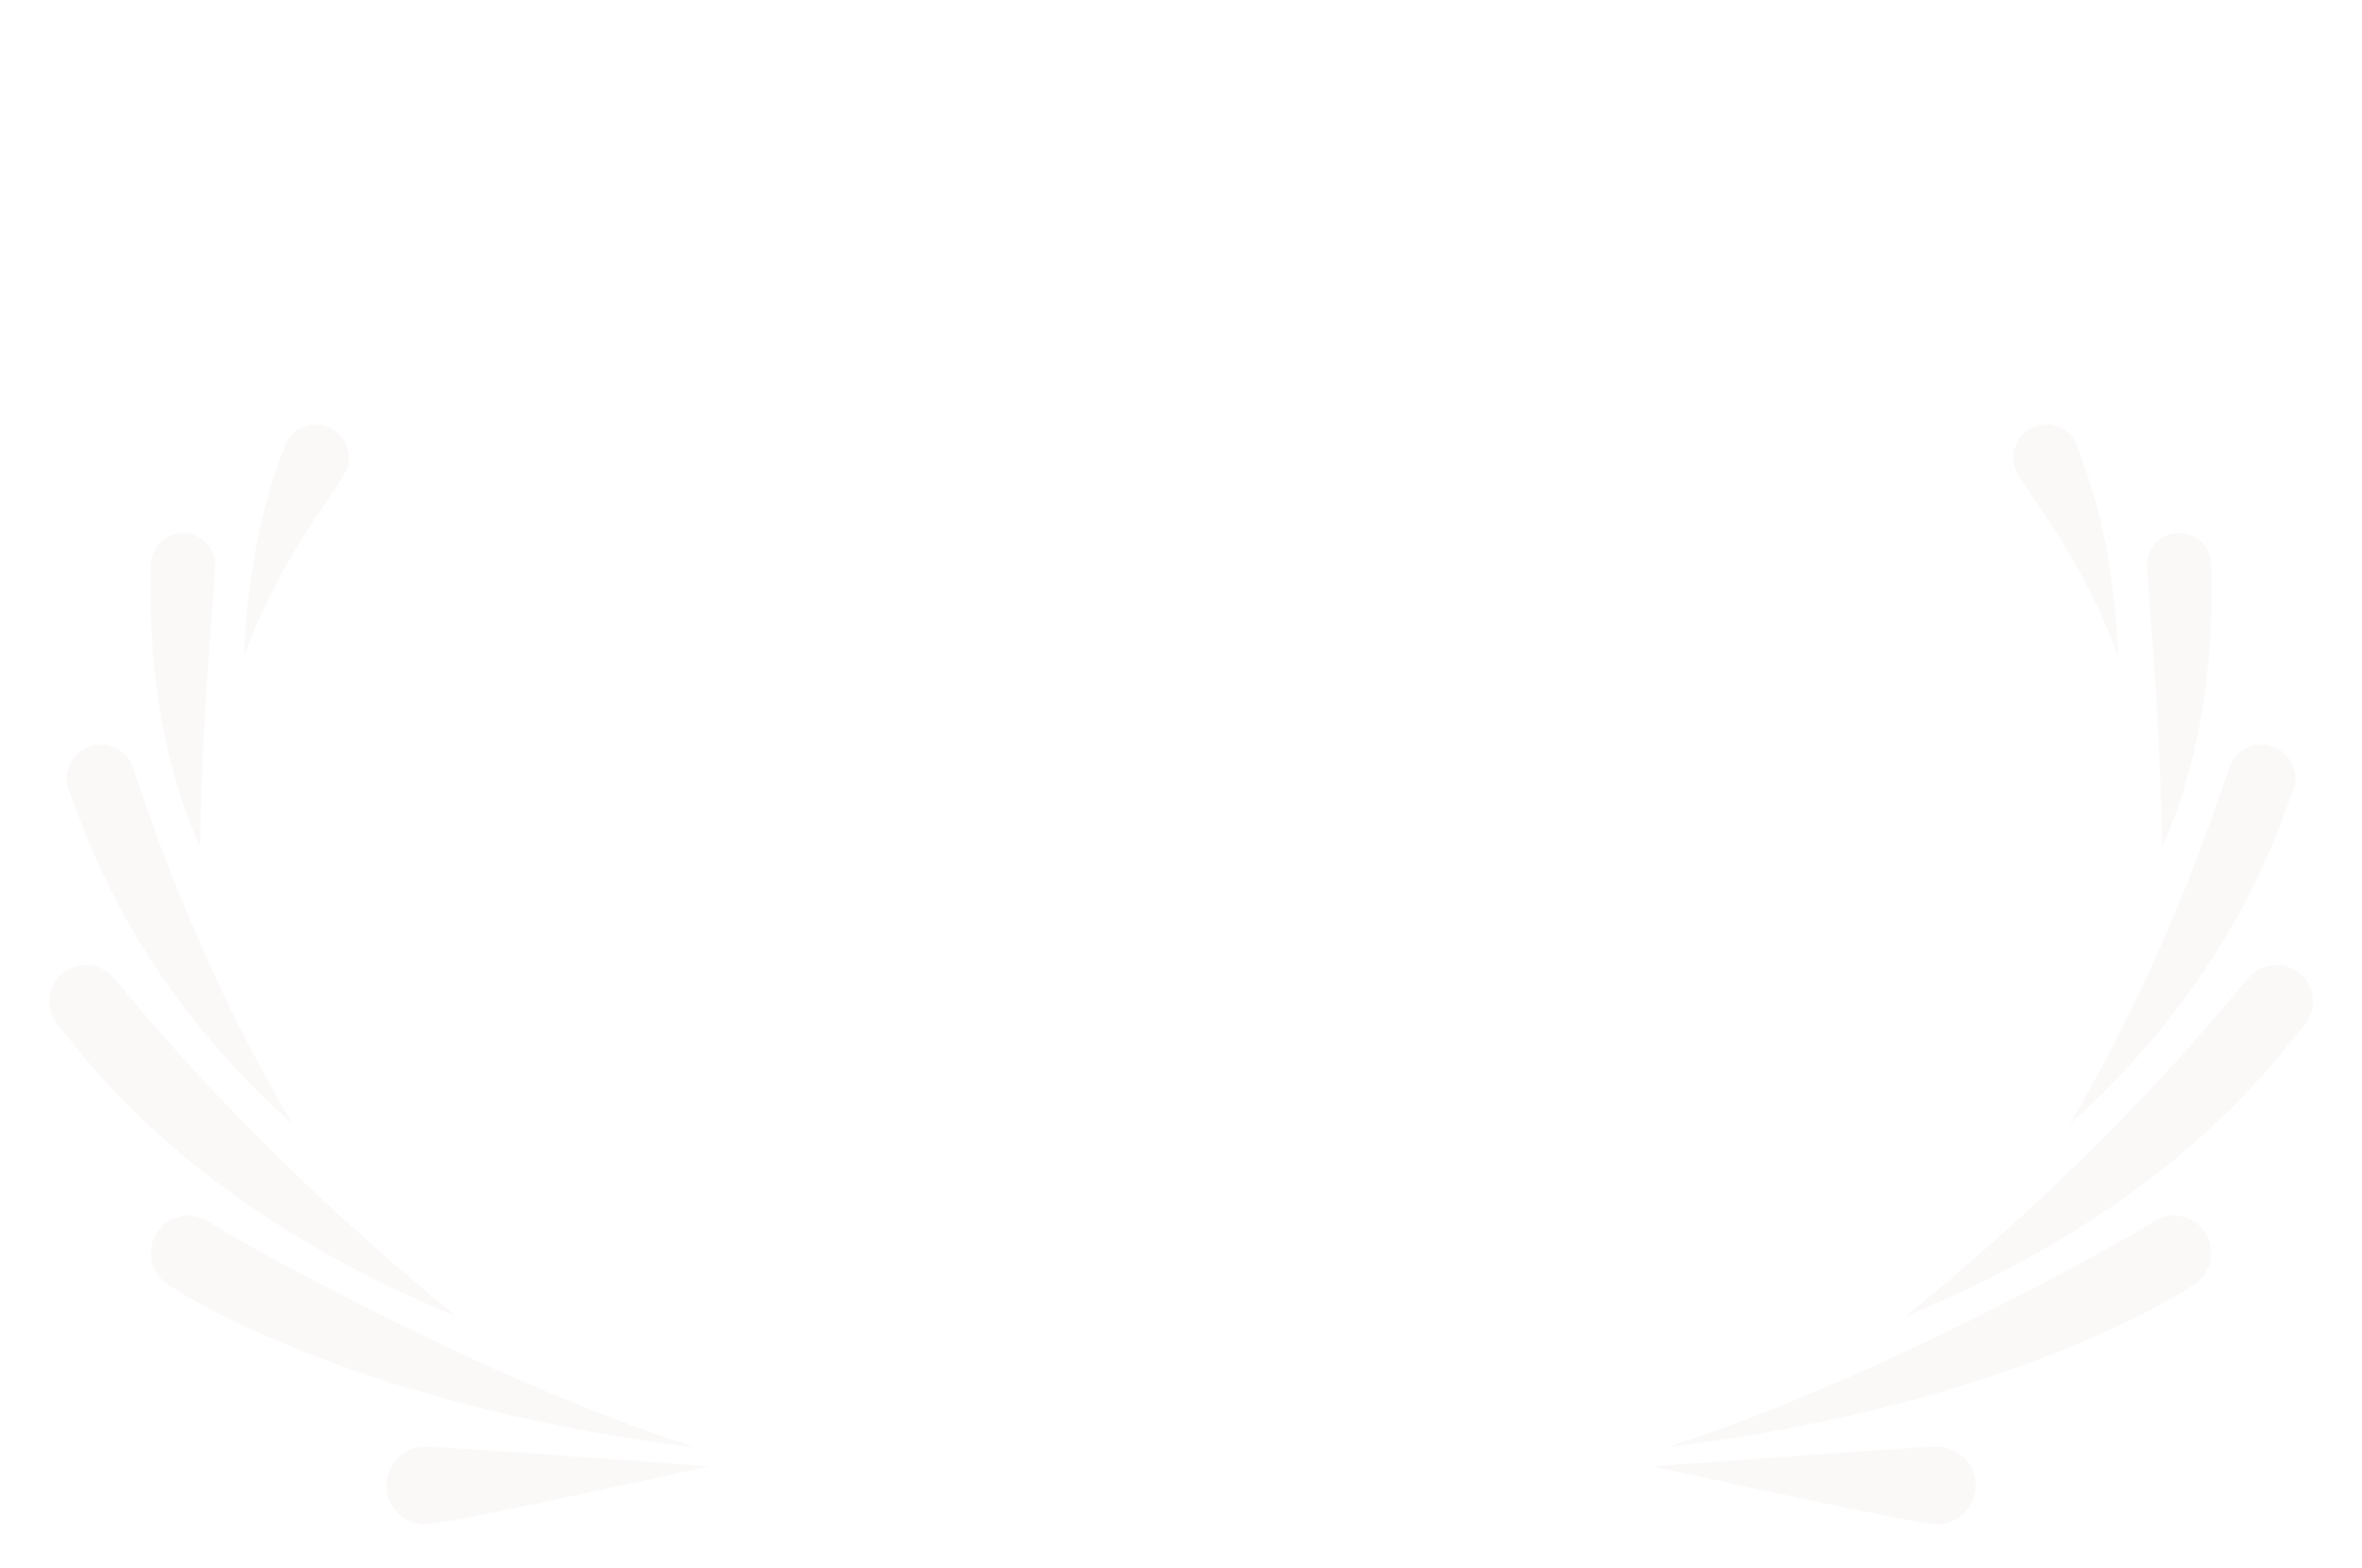 Connect Film Festival 2016 | Official Selection